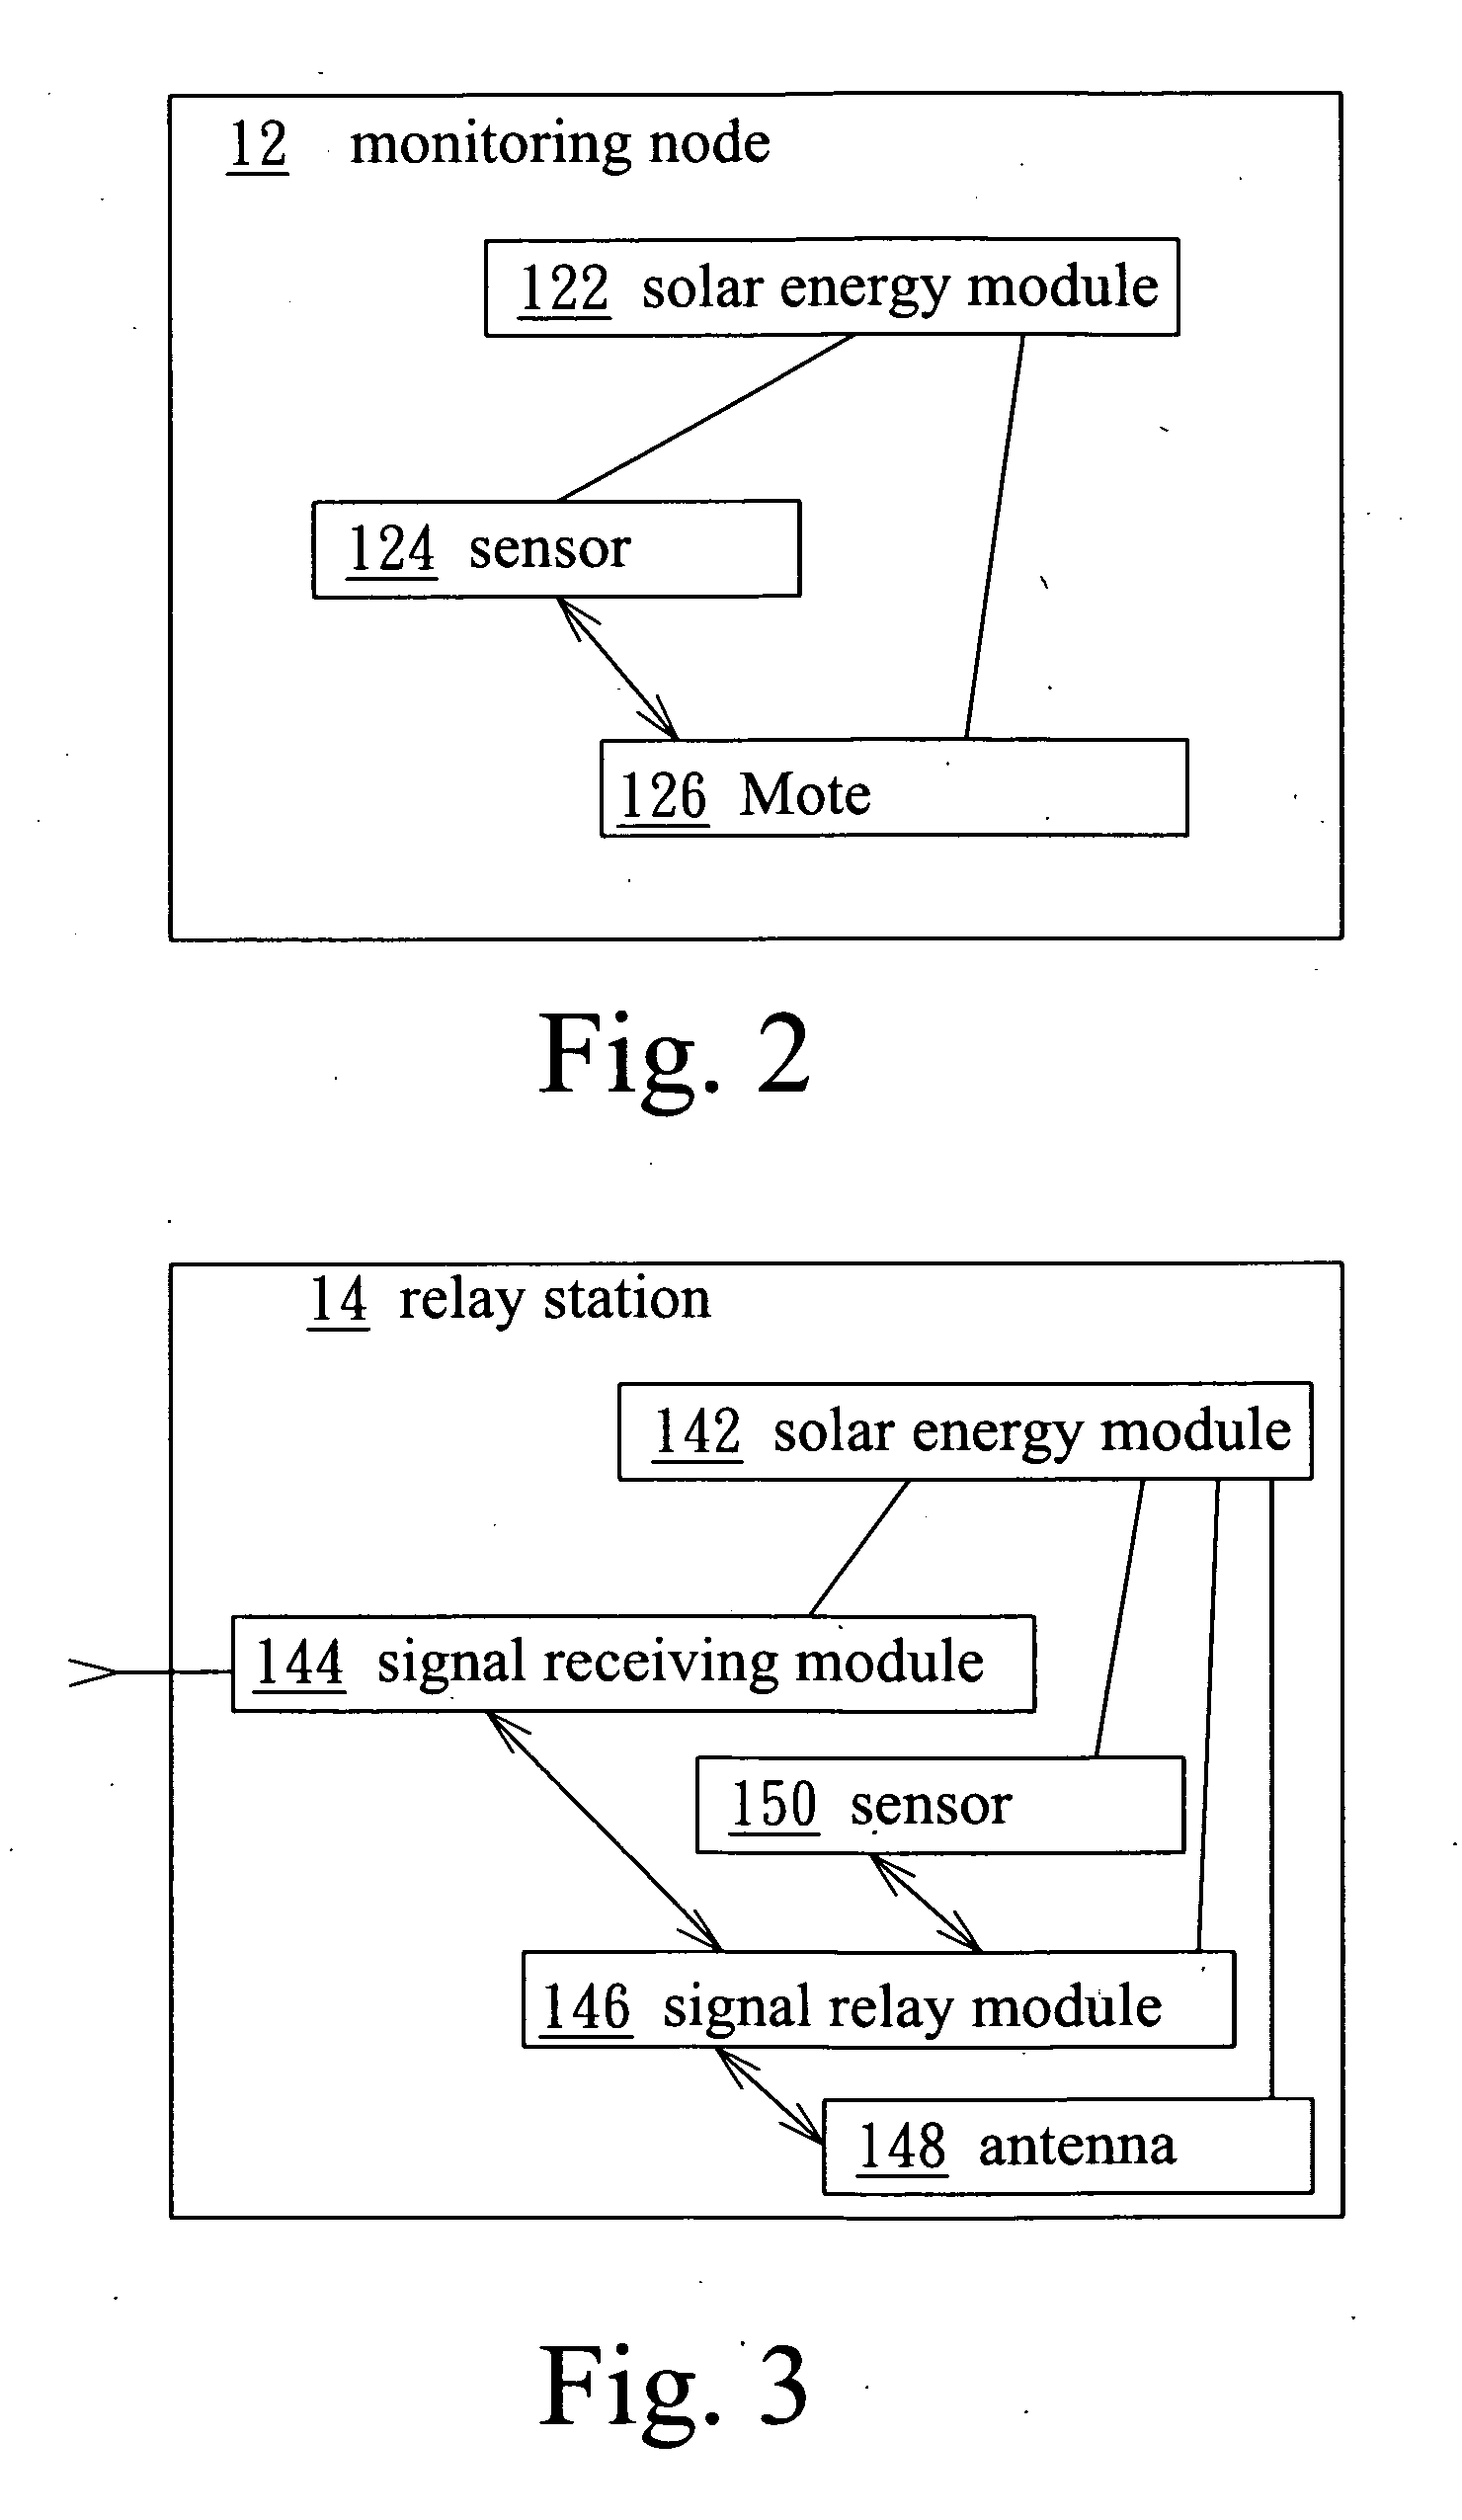 Using solar enery and wirless sensor network on the establishment of real-time monitoring system and method